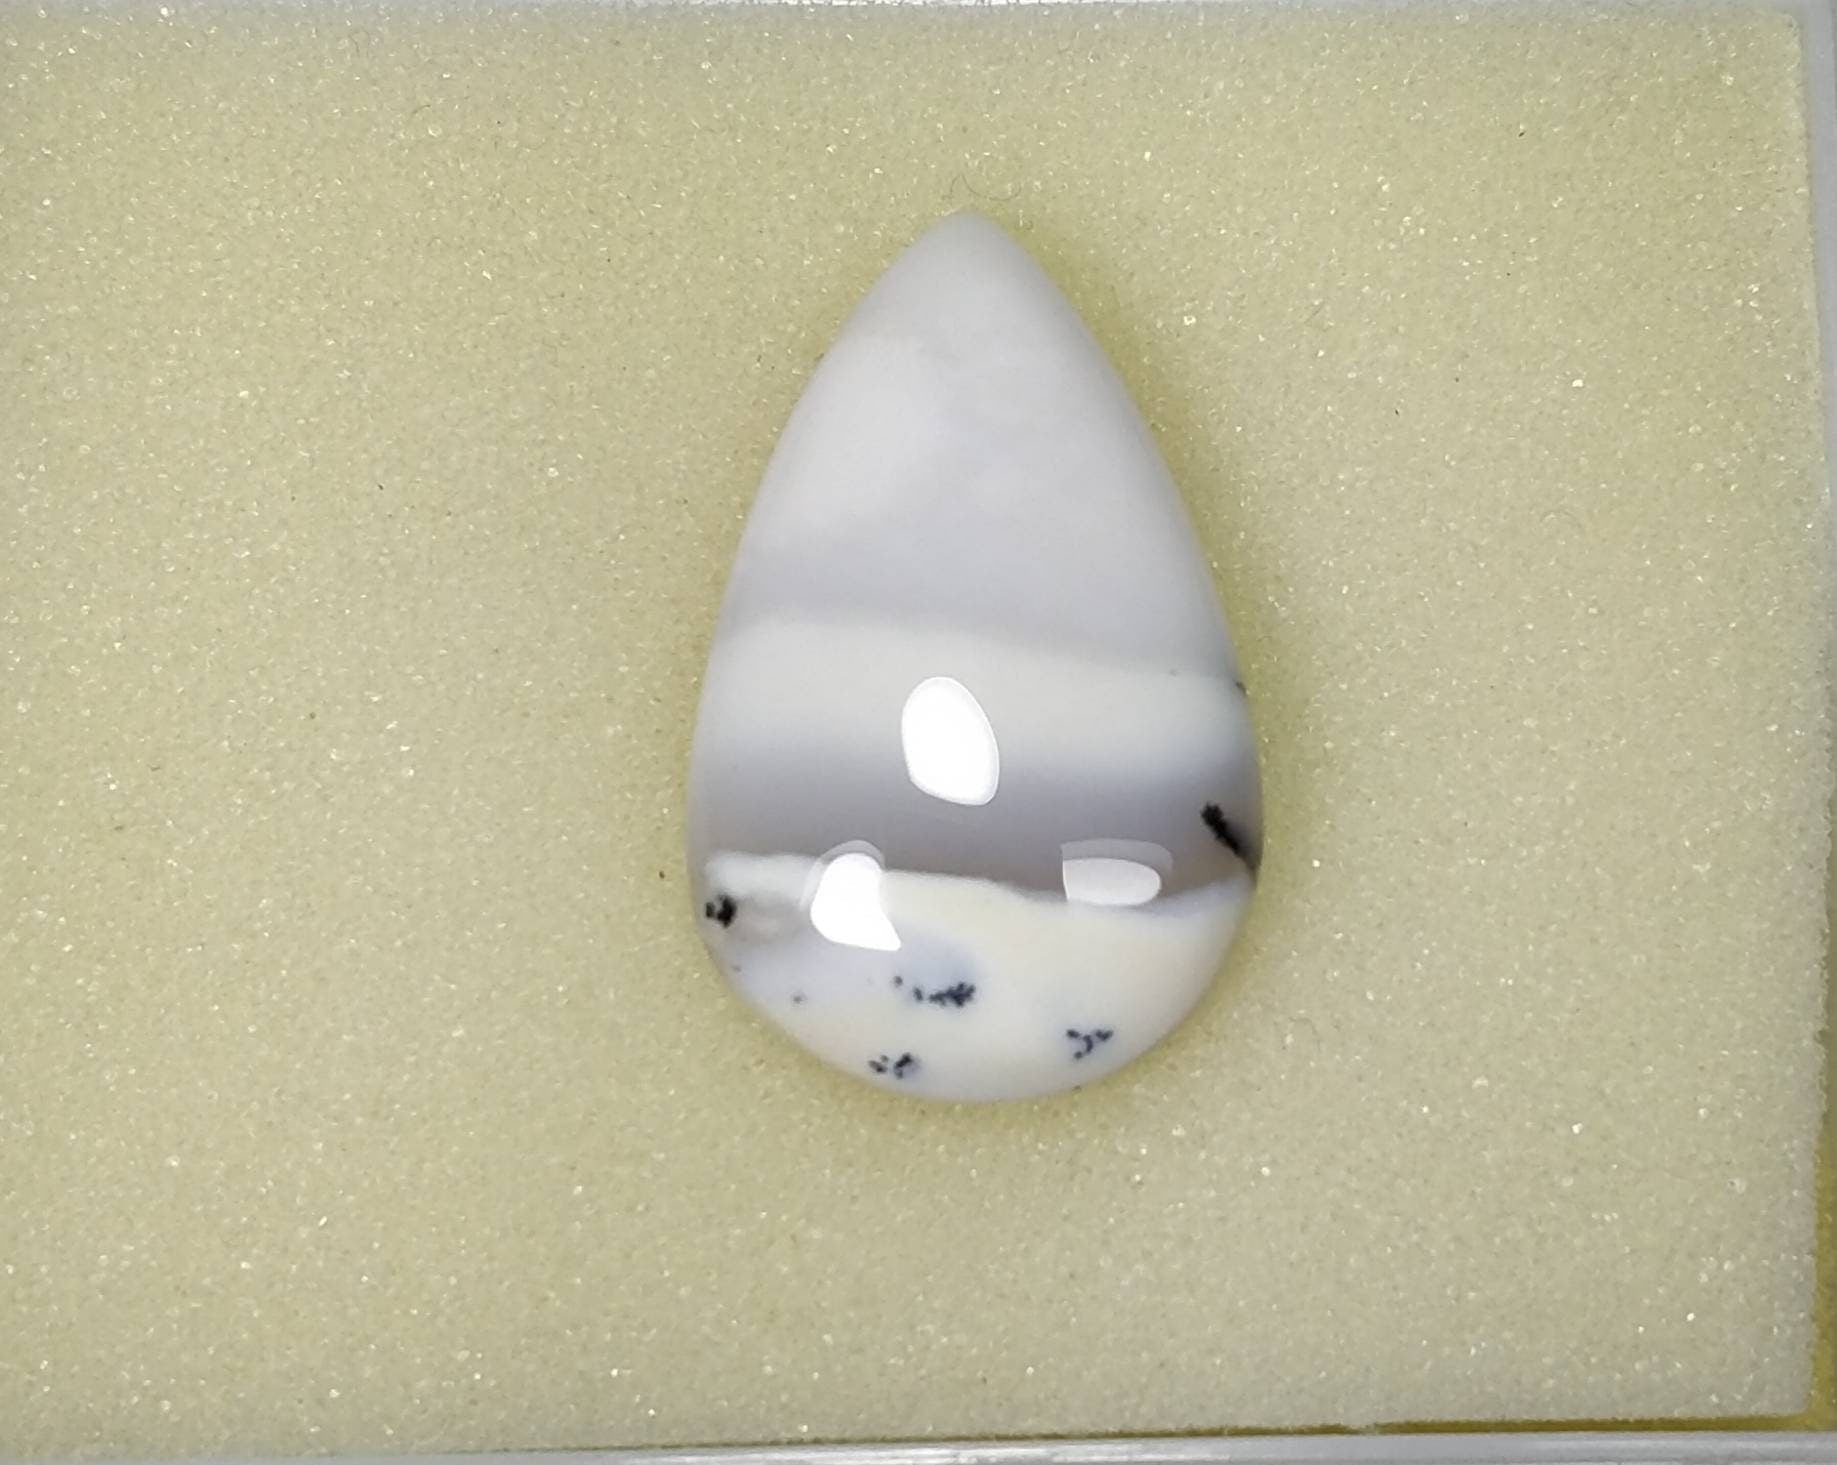 ARSAA GEMS AND MINERALSNatural top quality beautiful 32 carat pear shape dendritic opal cabochon - Premium  from ARSAA GEMS AND MINERALS - Just $12.00! Shop now at ARSAA GEMS AND MINERALS